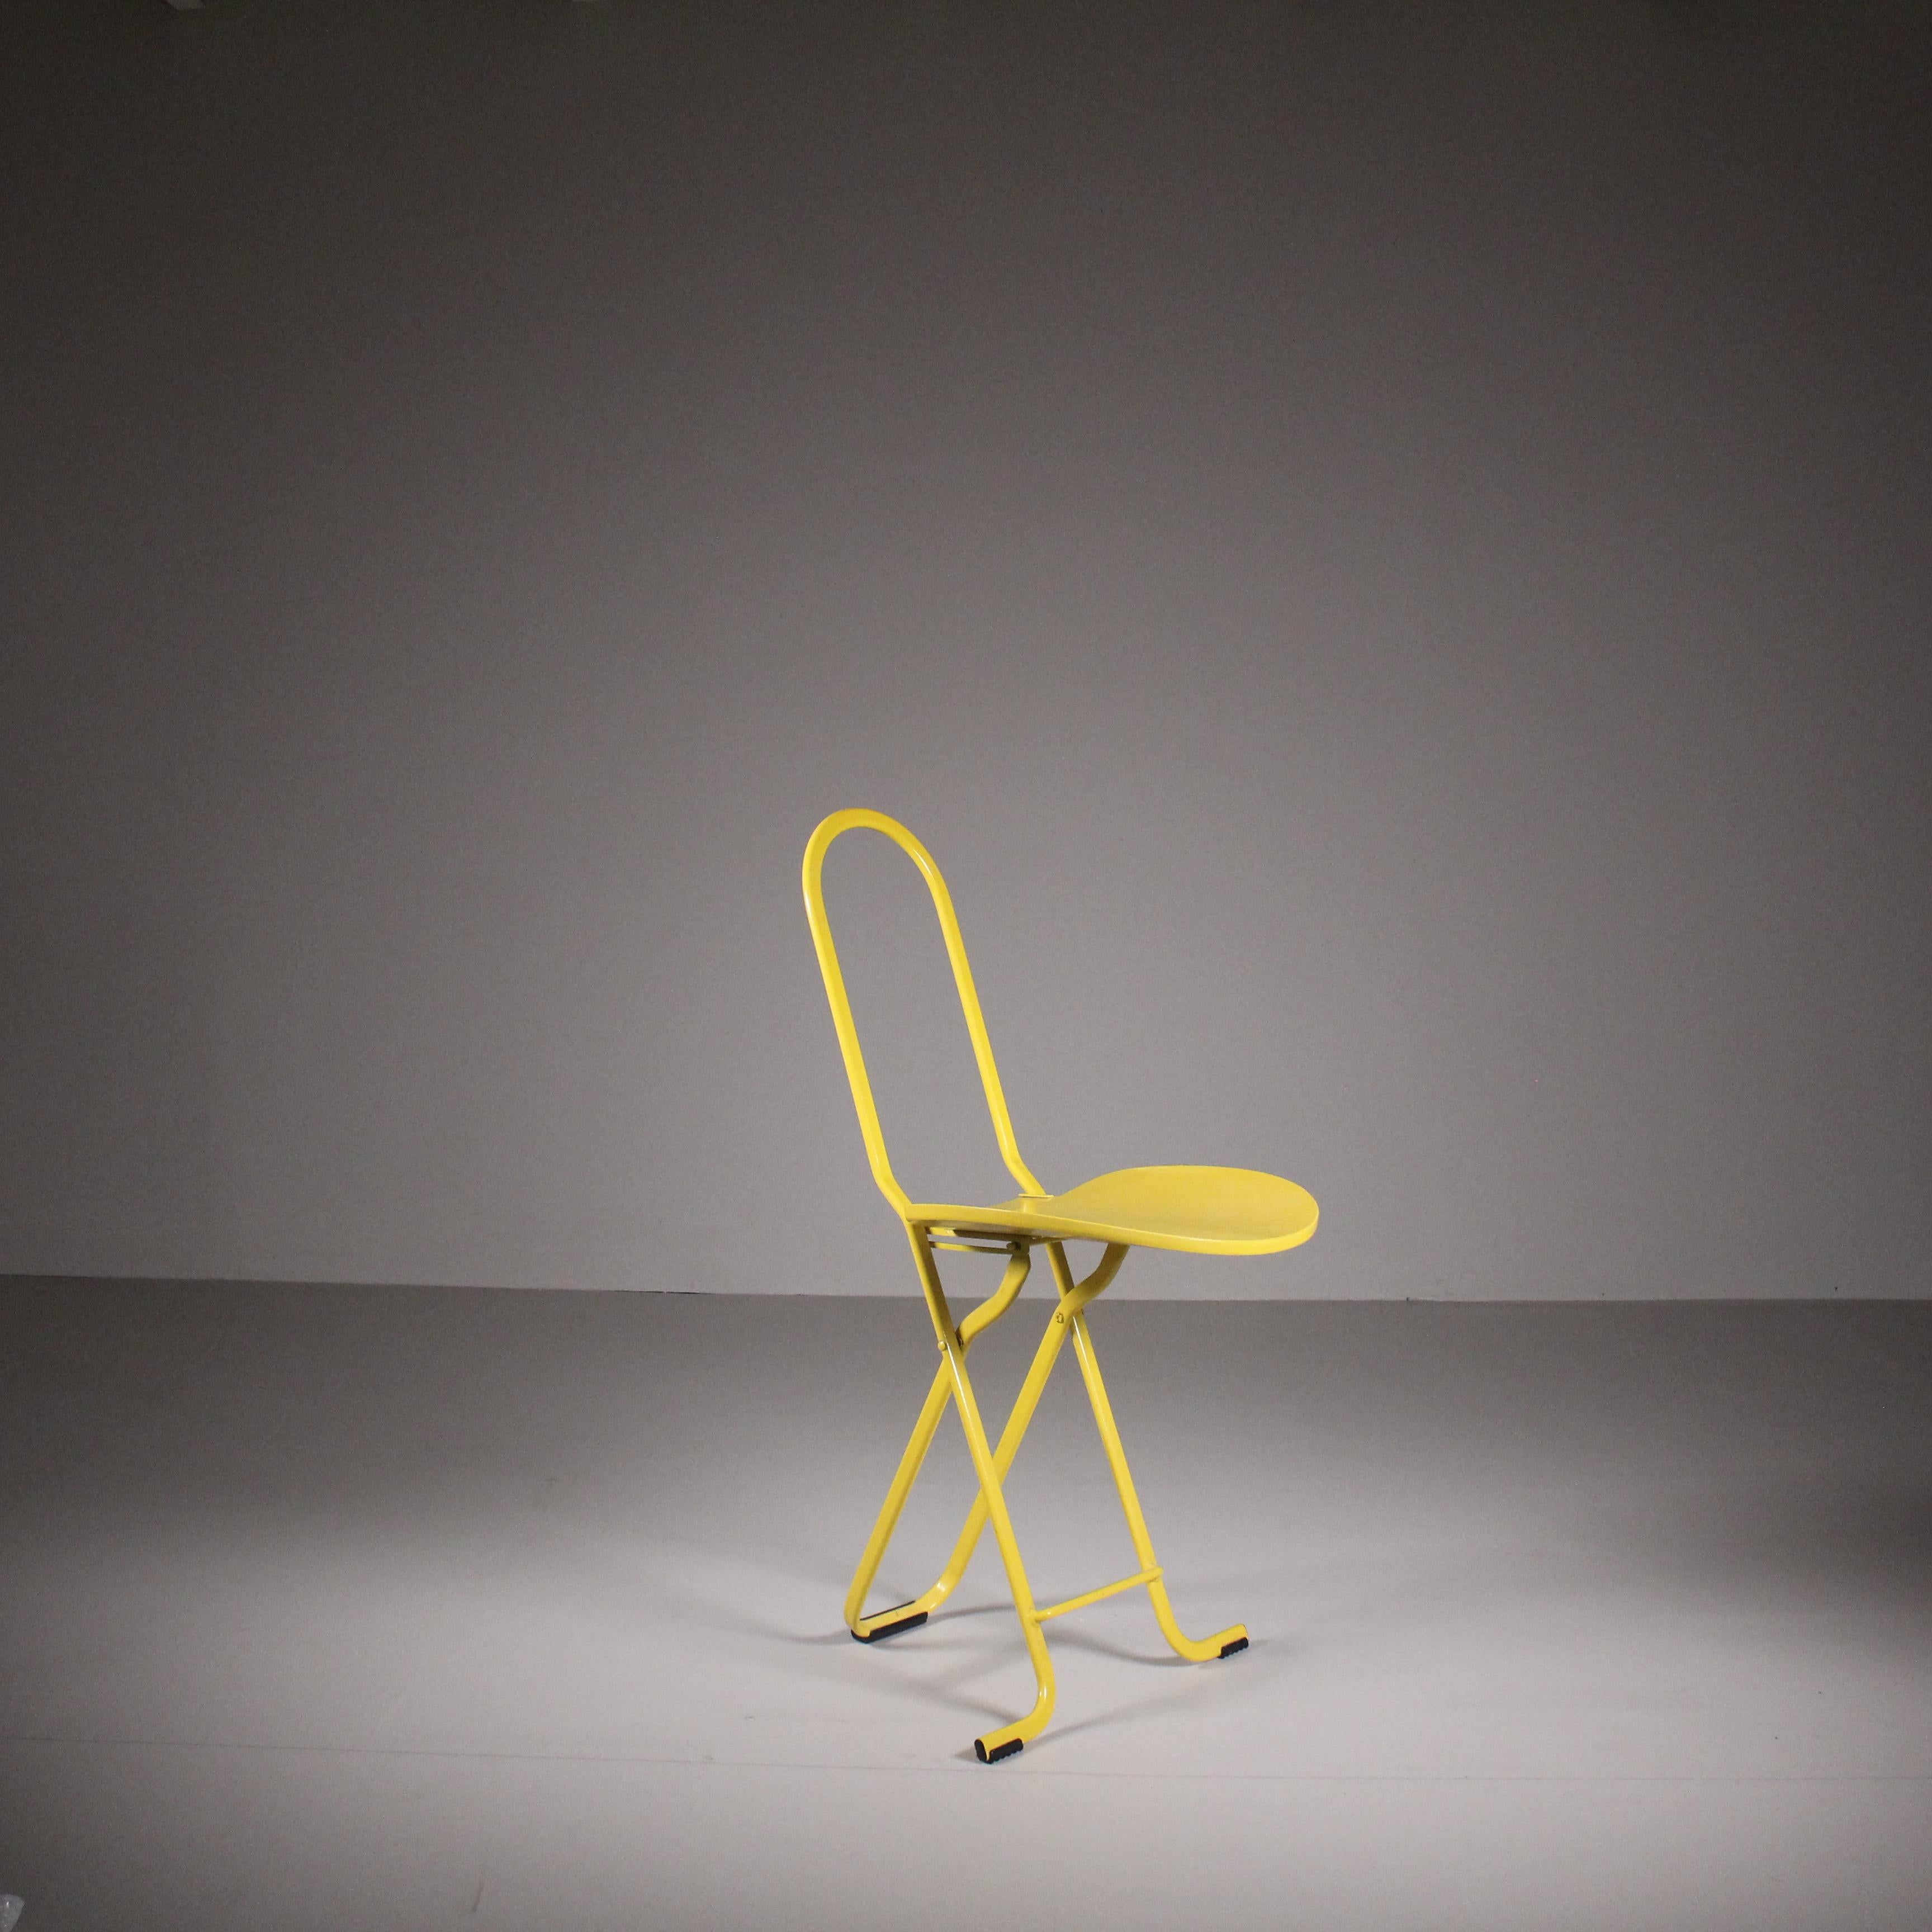 Foldable Chair Dafne, Gastone Rinaldi, Thema, 1970. The Dafne Foldable Chair, designed by Gastone Rinaldi in 1970 as part of the Thema collection, exudes timeless elegance and practicality. With its vibrant yellow hue, this chair adds a pop of color